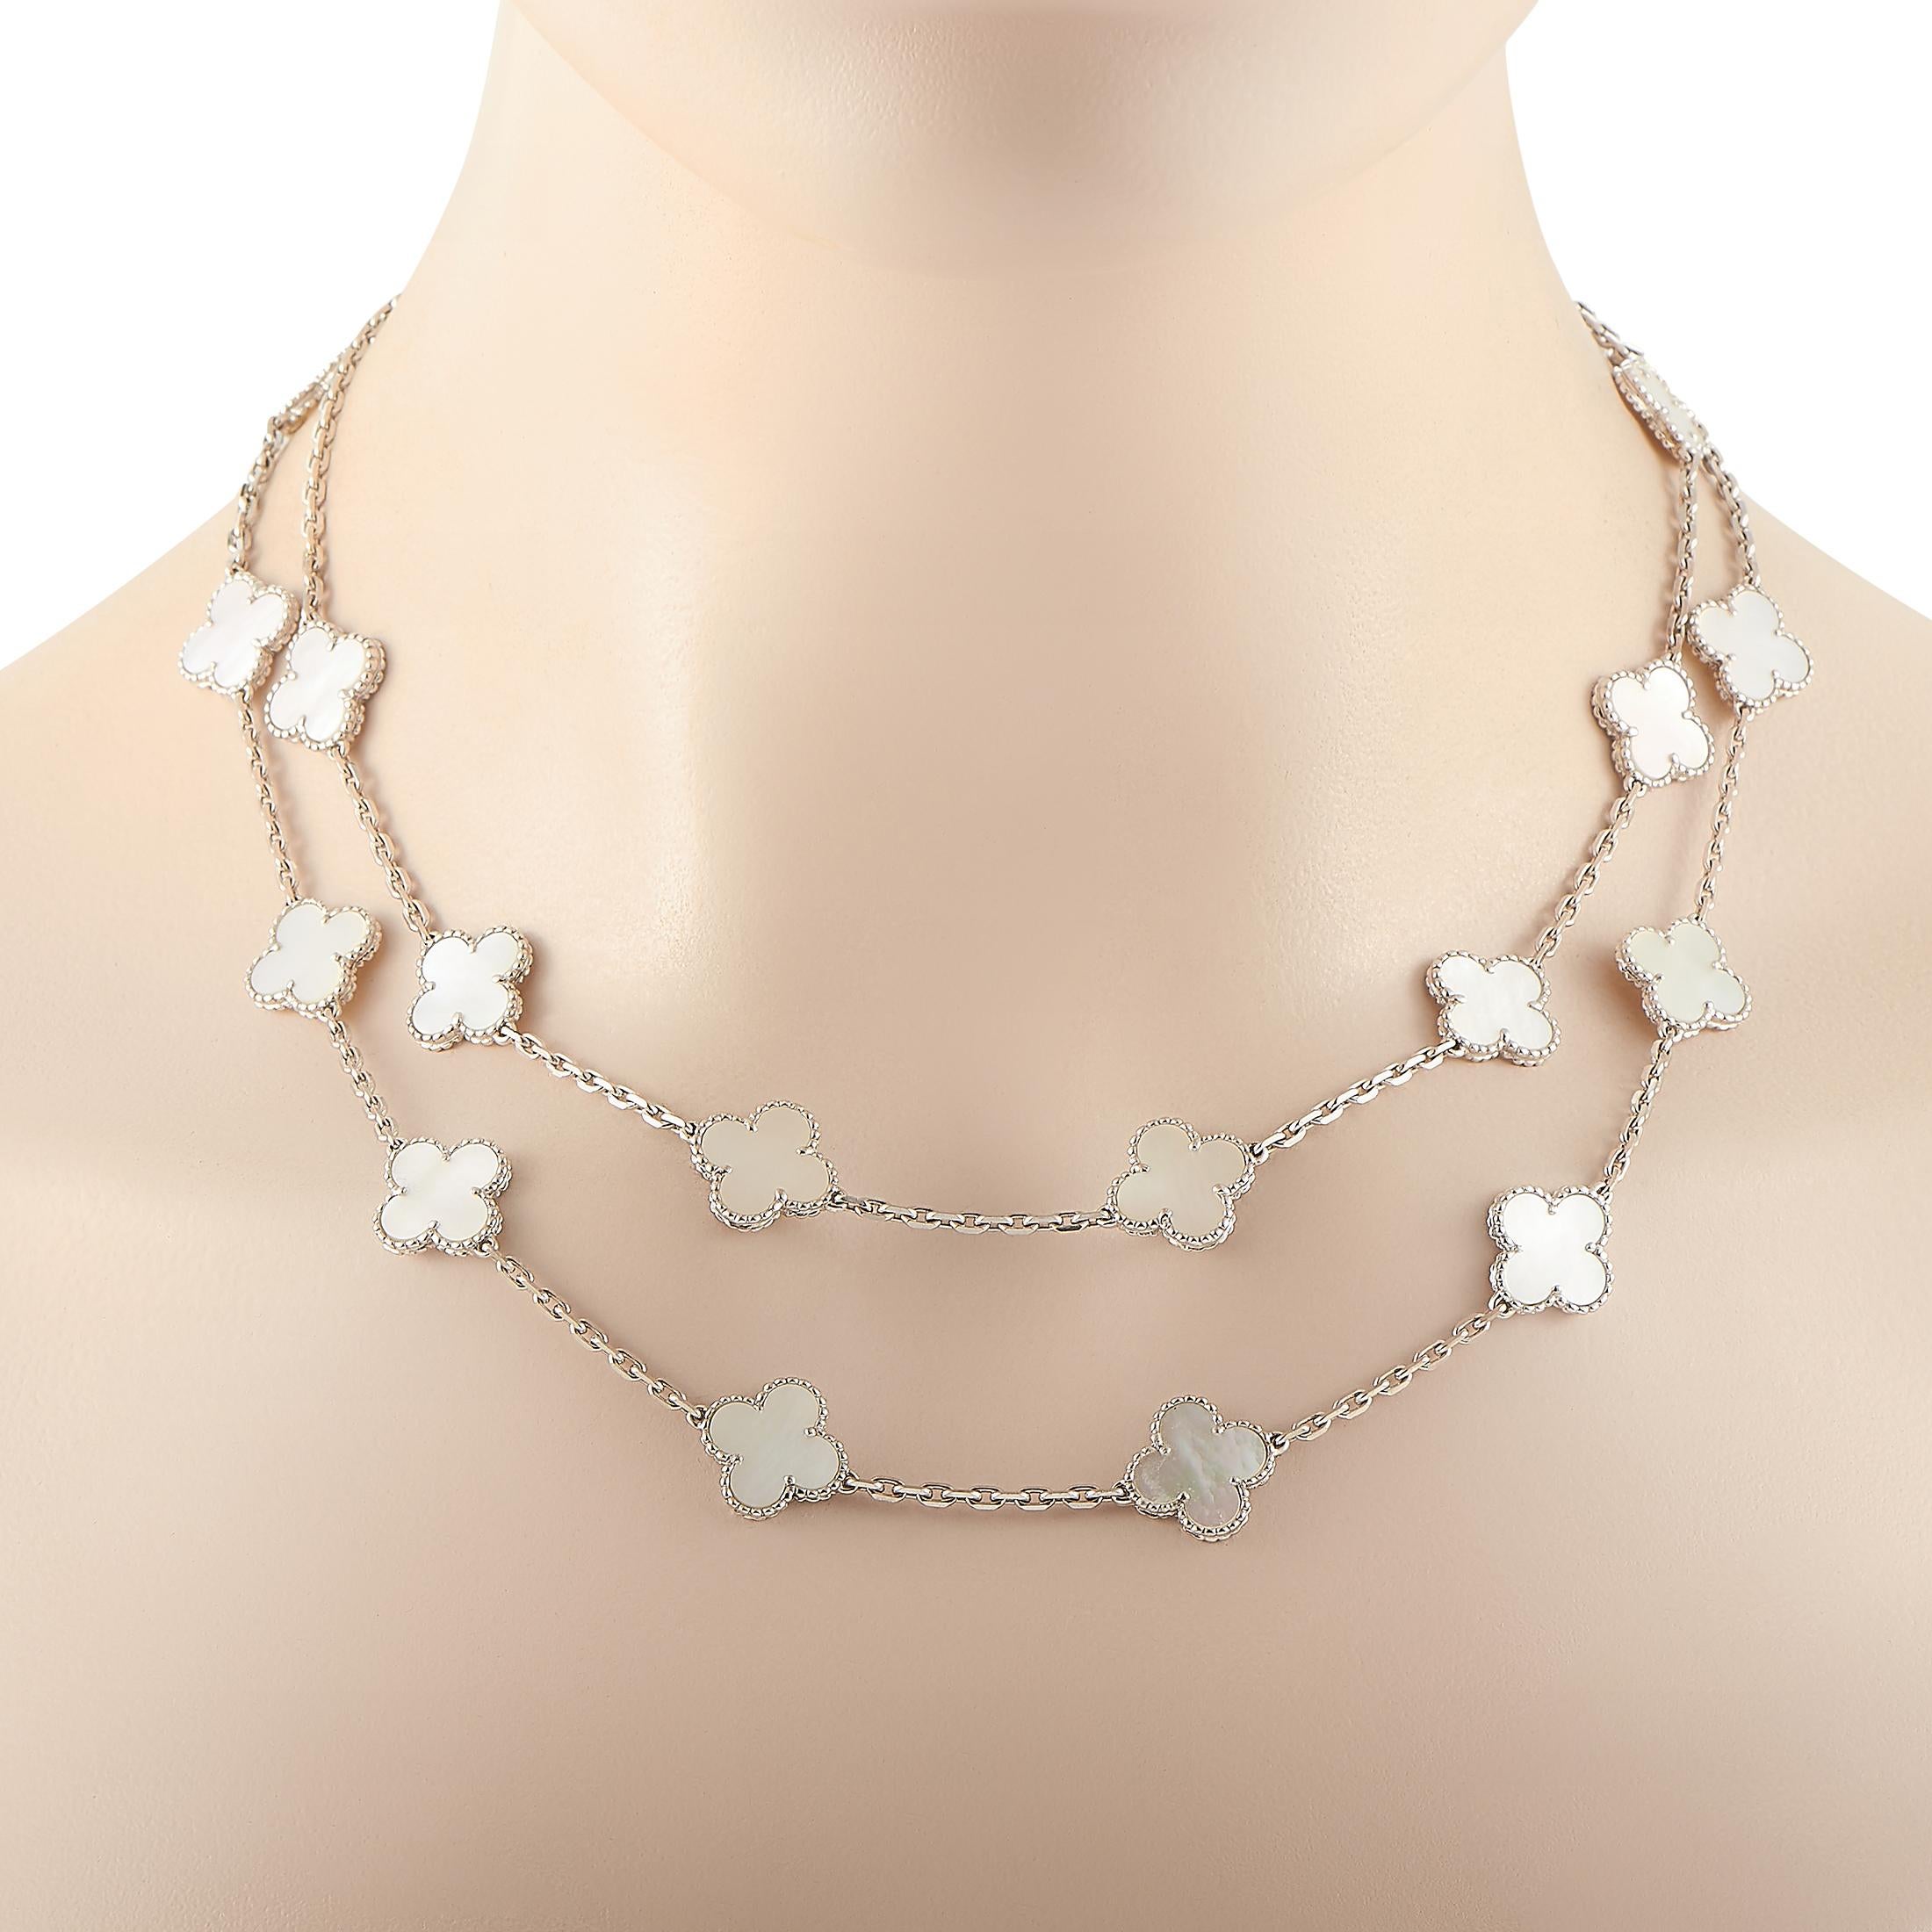 The Van Cleef & Arpels “Vintage Alhambra” necklace with 20 clover leaf motifs is made out of 18K white gold and mother of pearl. The necklace weighs 47 grams and measures 38” in length.

This jewelry piece is offered in estate condition and includes